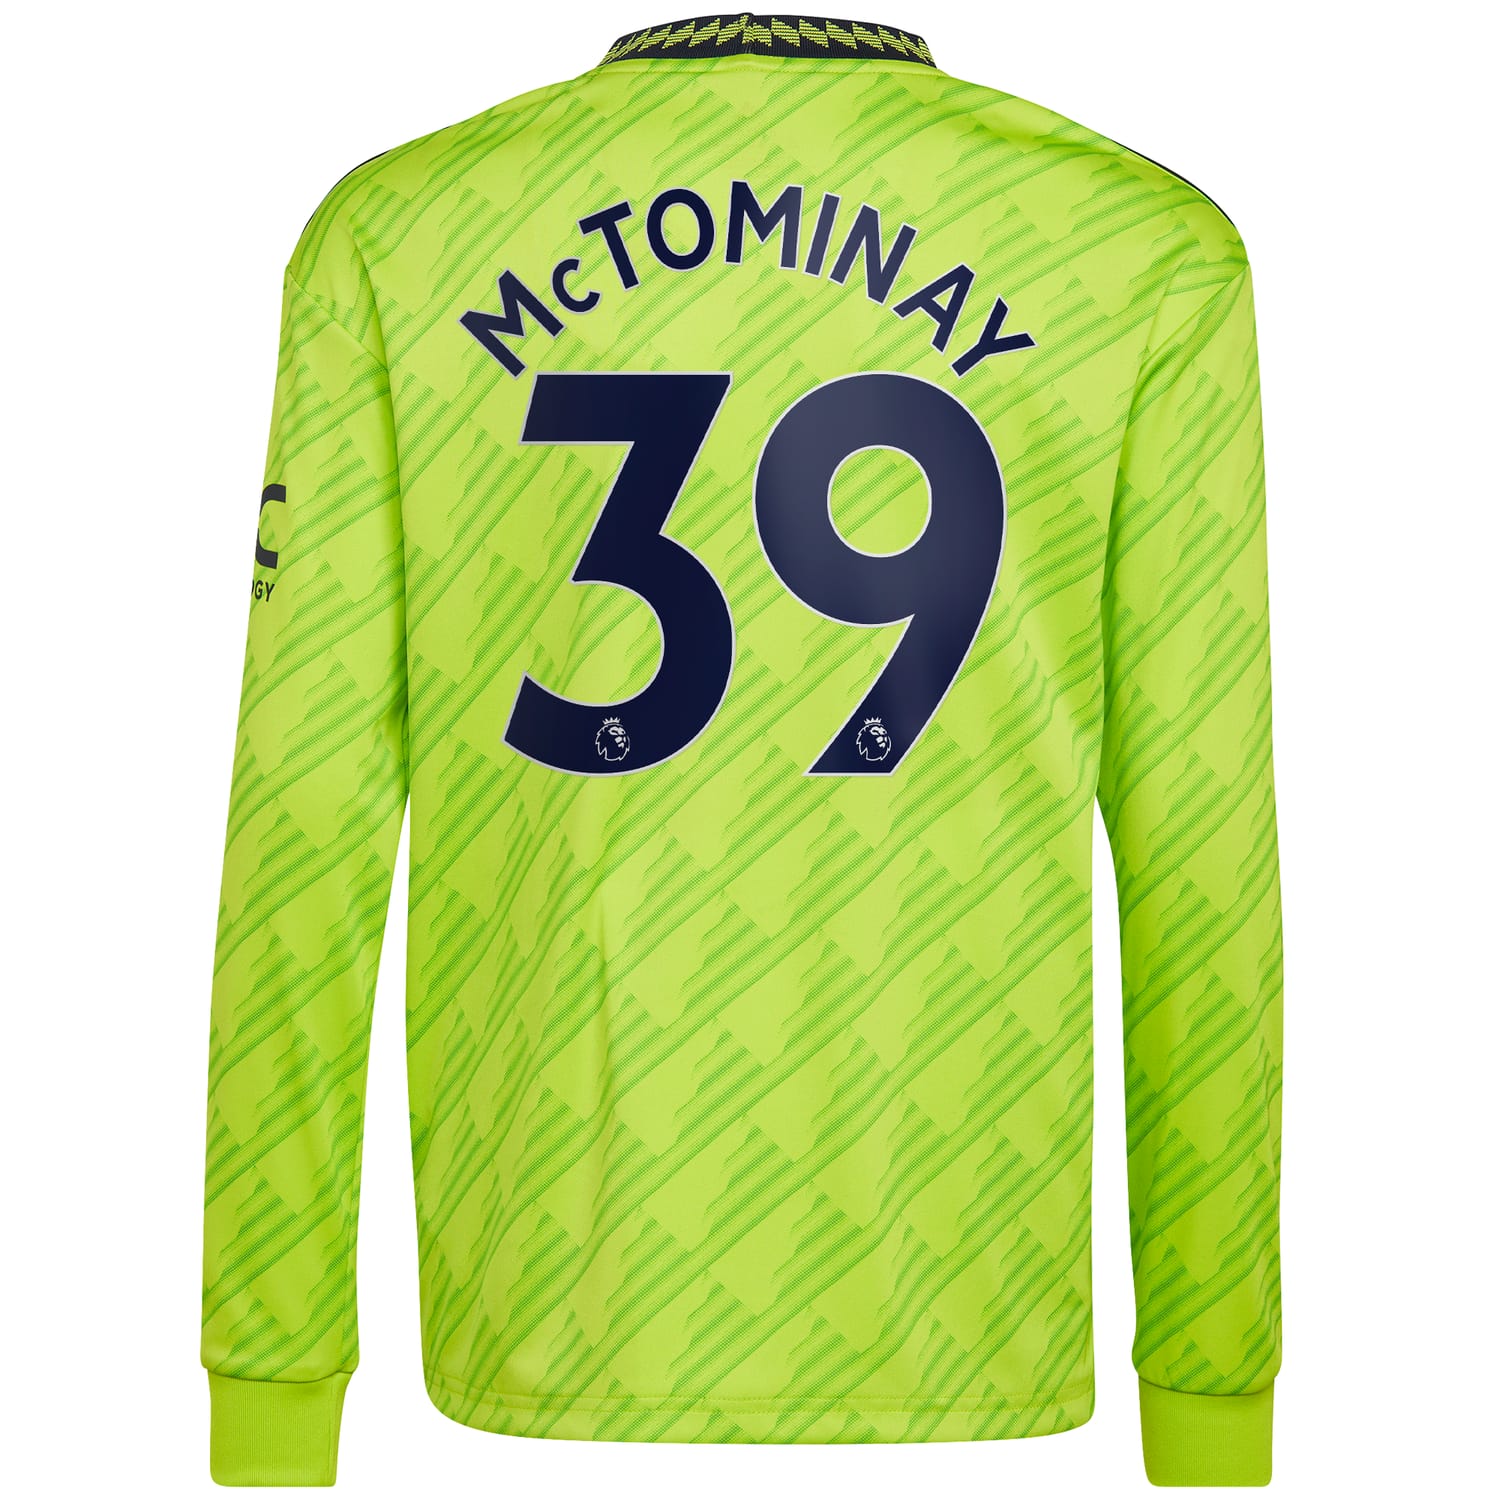 Premier League Manchester United Third Jersey Shirt Long Sleeve 2022-23 player Scott McTominay 39 printing for Men